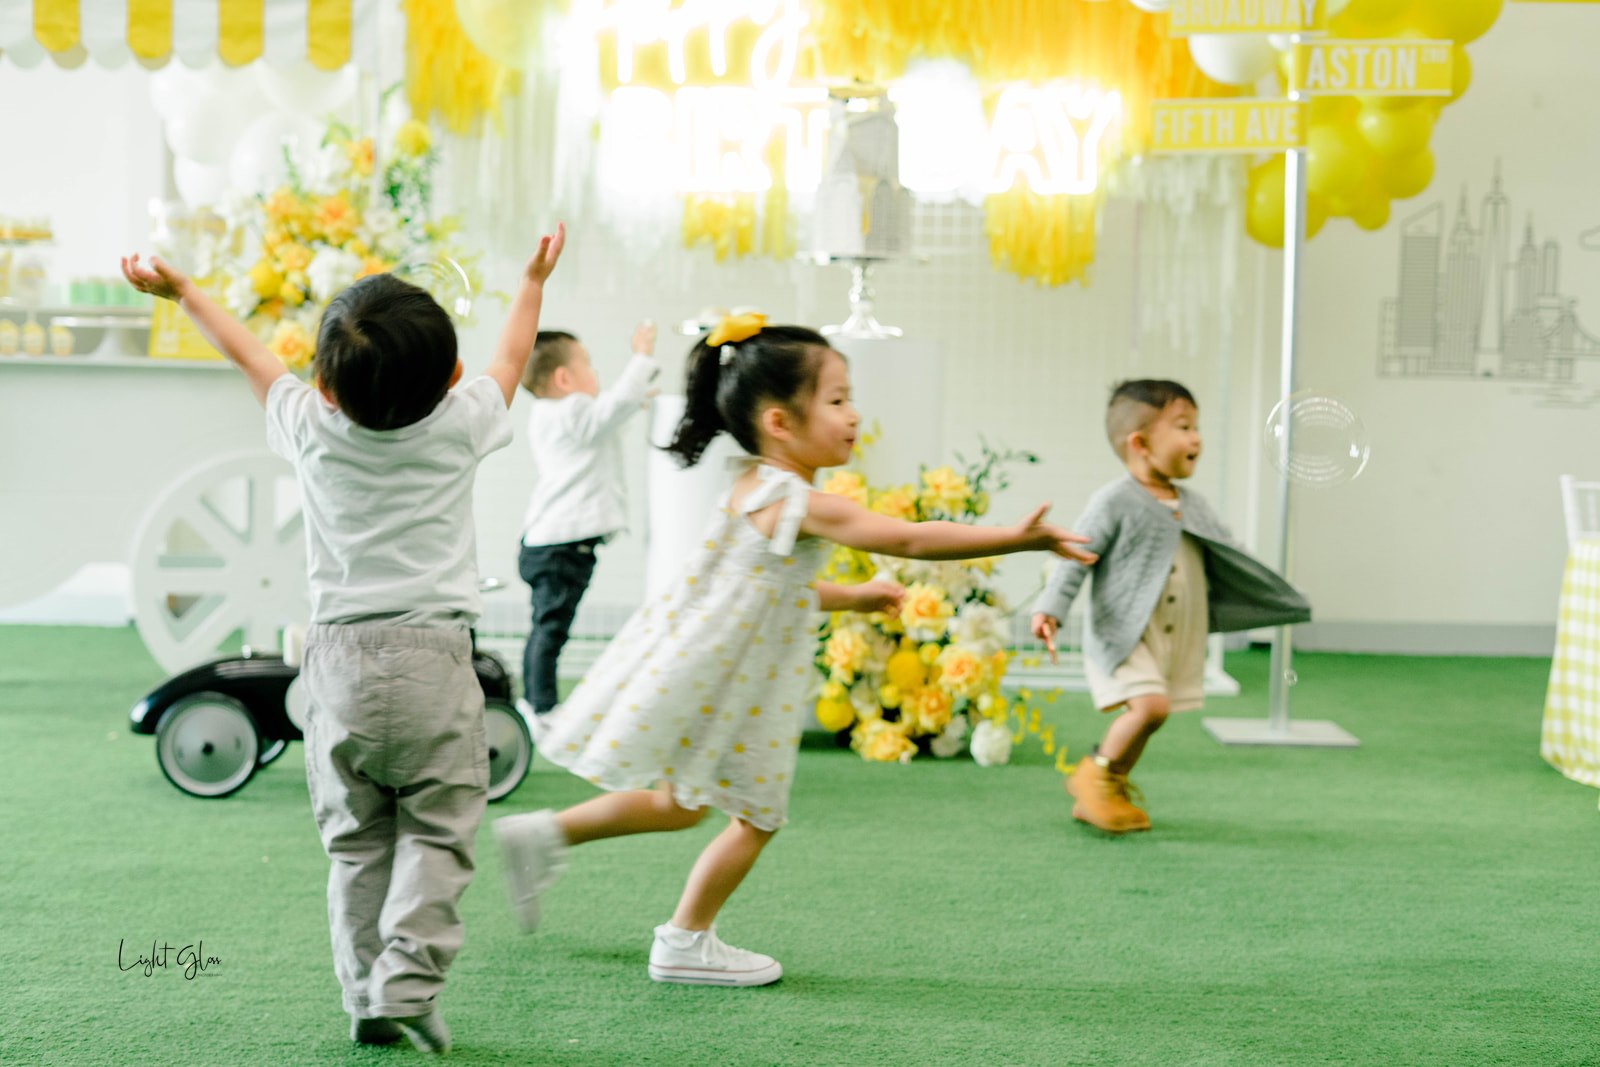 , A bright New York inspired kids party